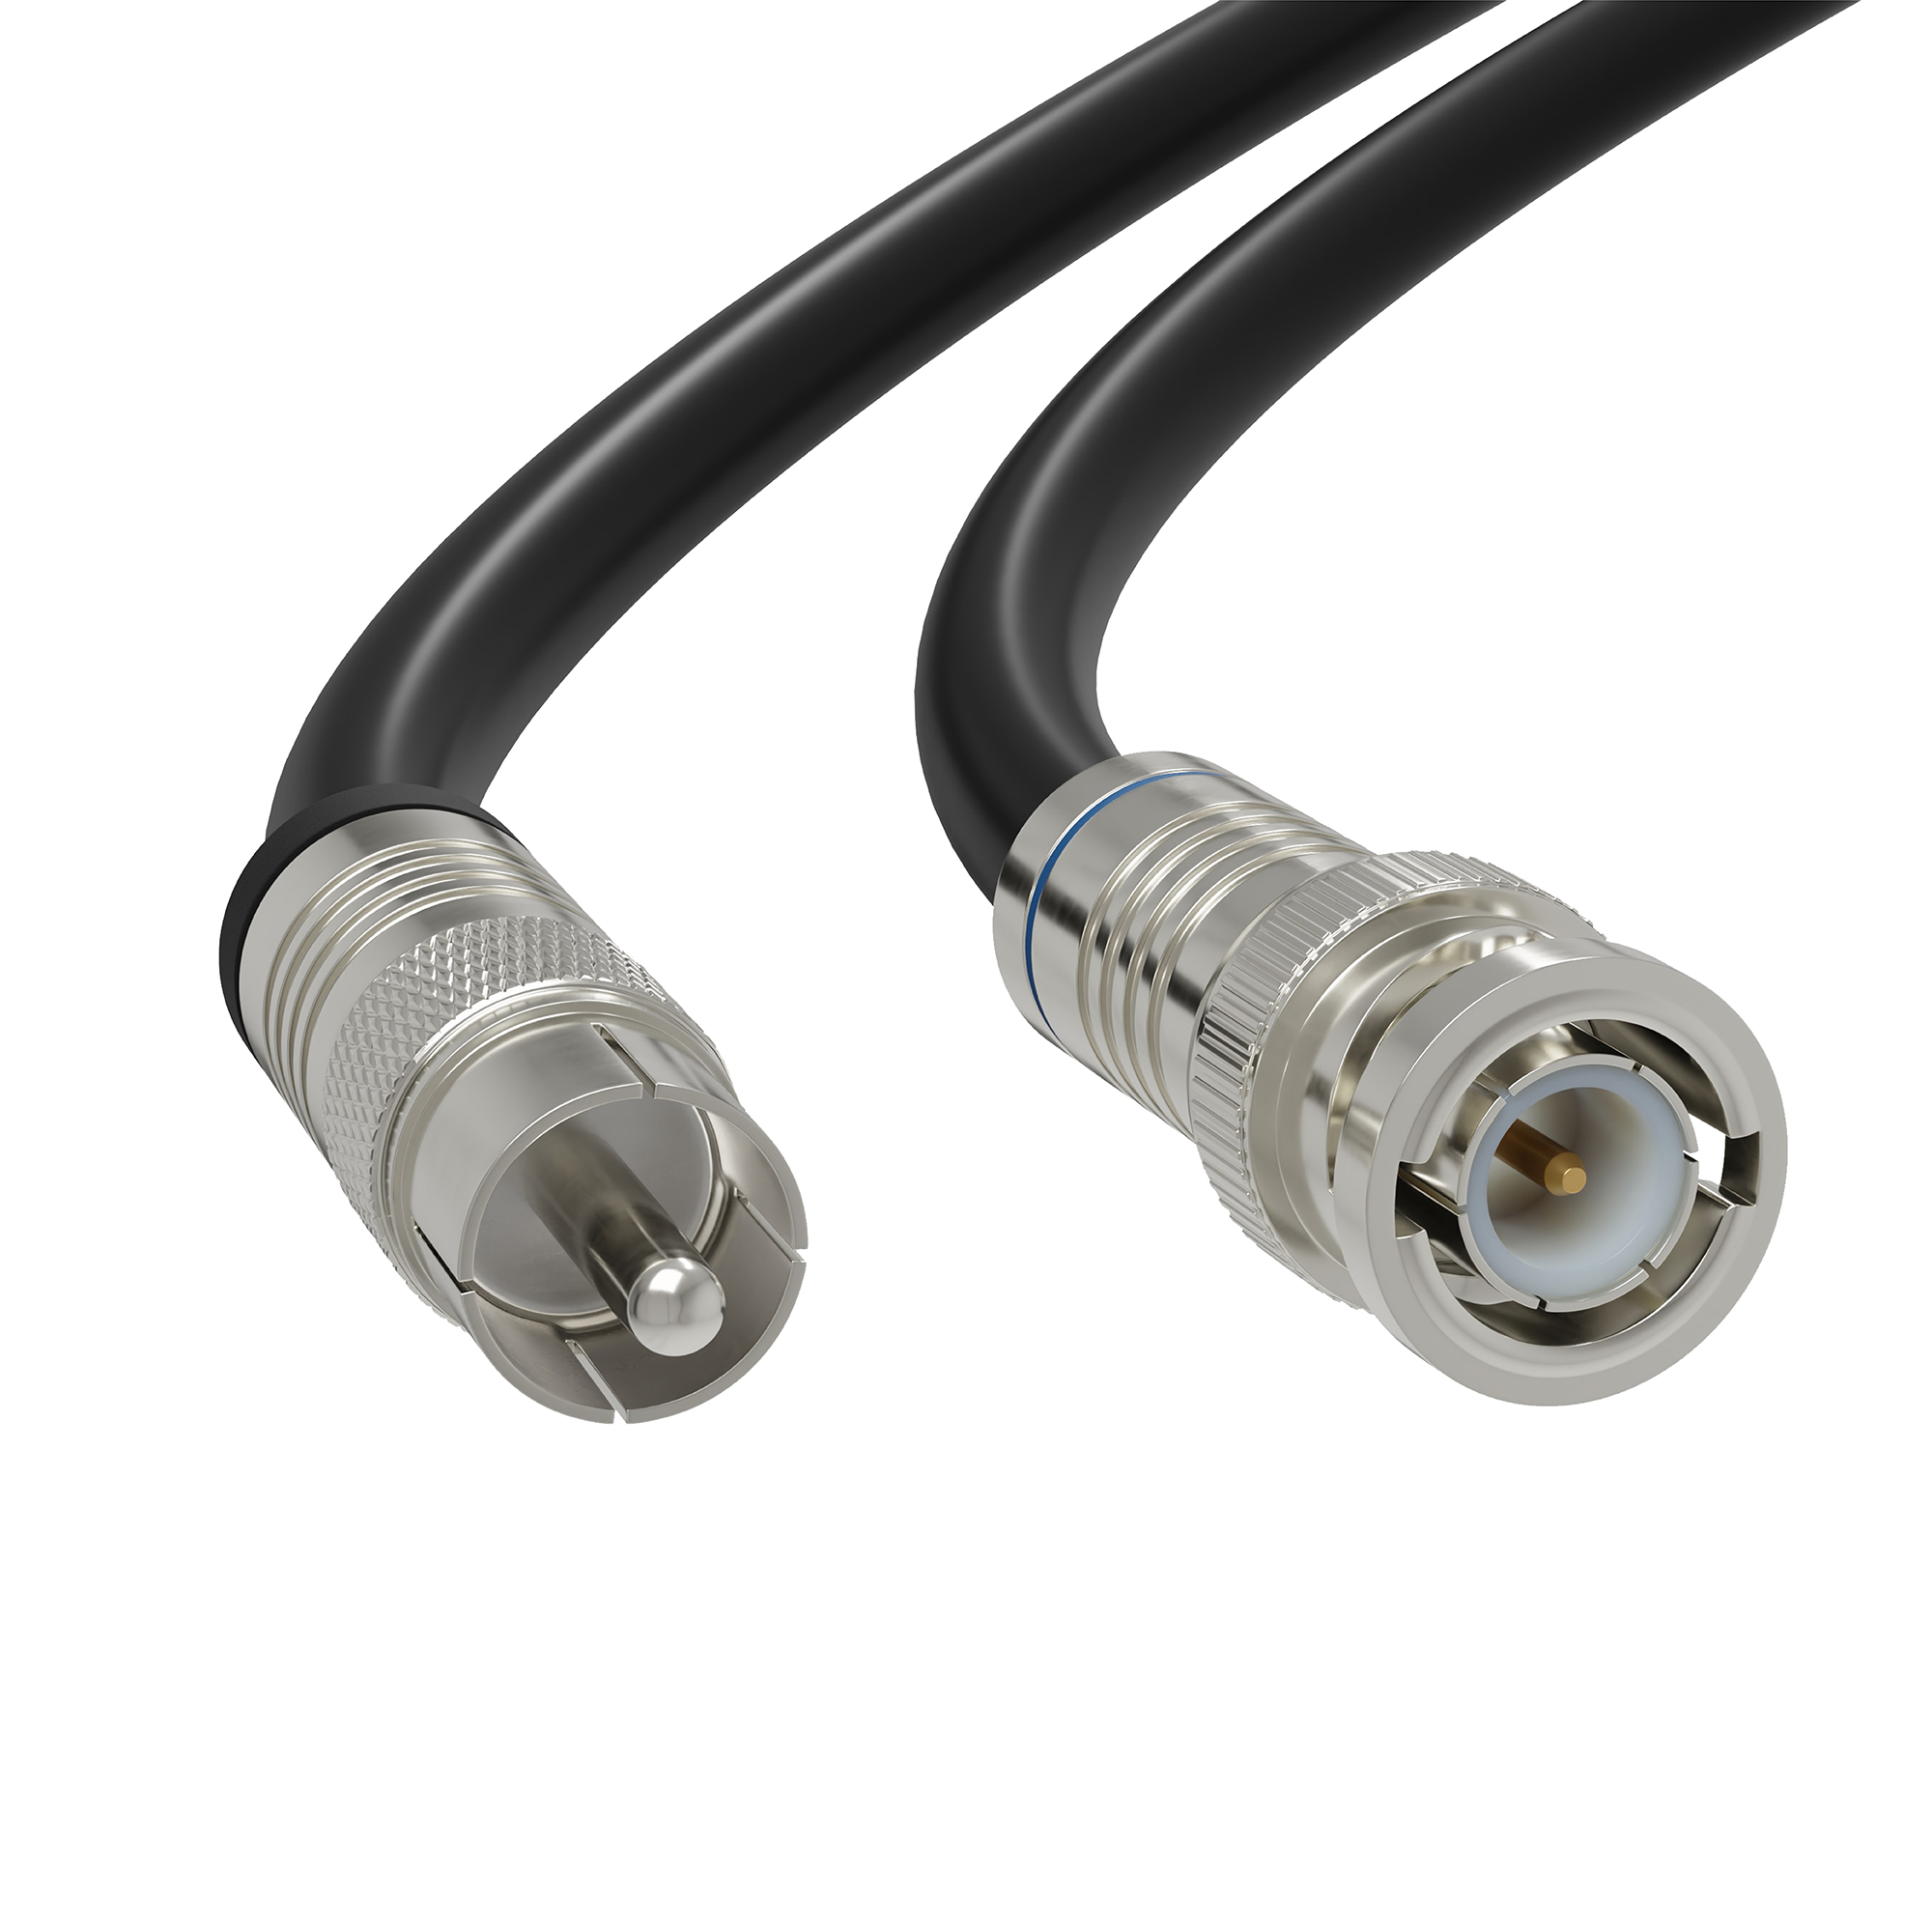 Black, 25 ft BNC to RCA RG6 Cable - Professional Grade - Male BNC to Male RCA Cable  - BNC Cable - 75 Ohm Coaxial, 50/75 Ohm Connectors, SDI, HD-SDI, CCTV, Camera, and More - 25 Feet Long, in Black - image 1 of 10